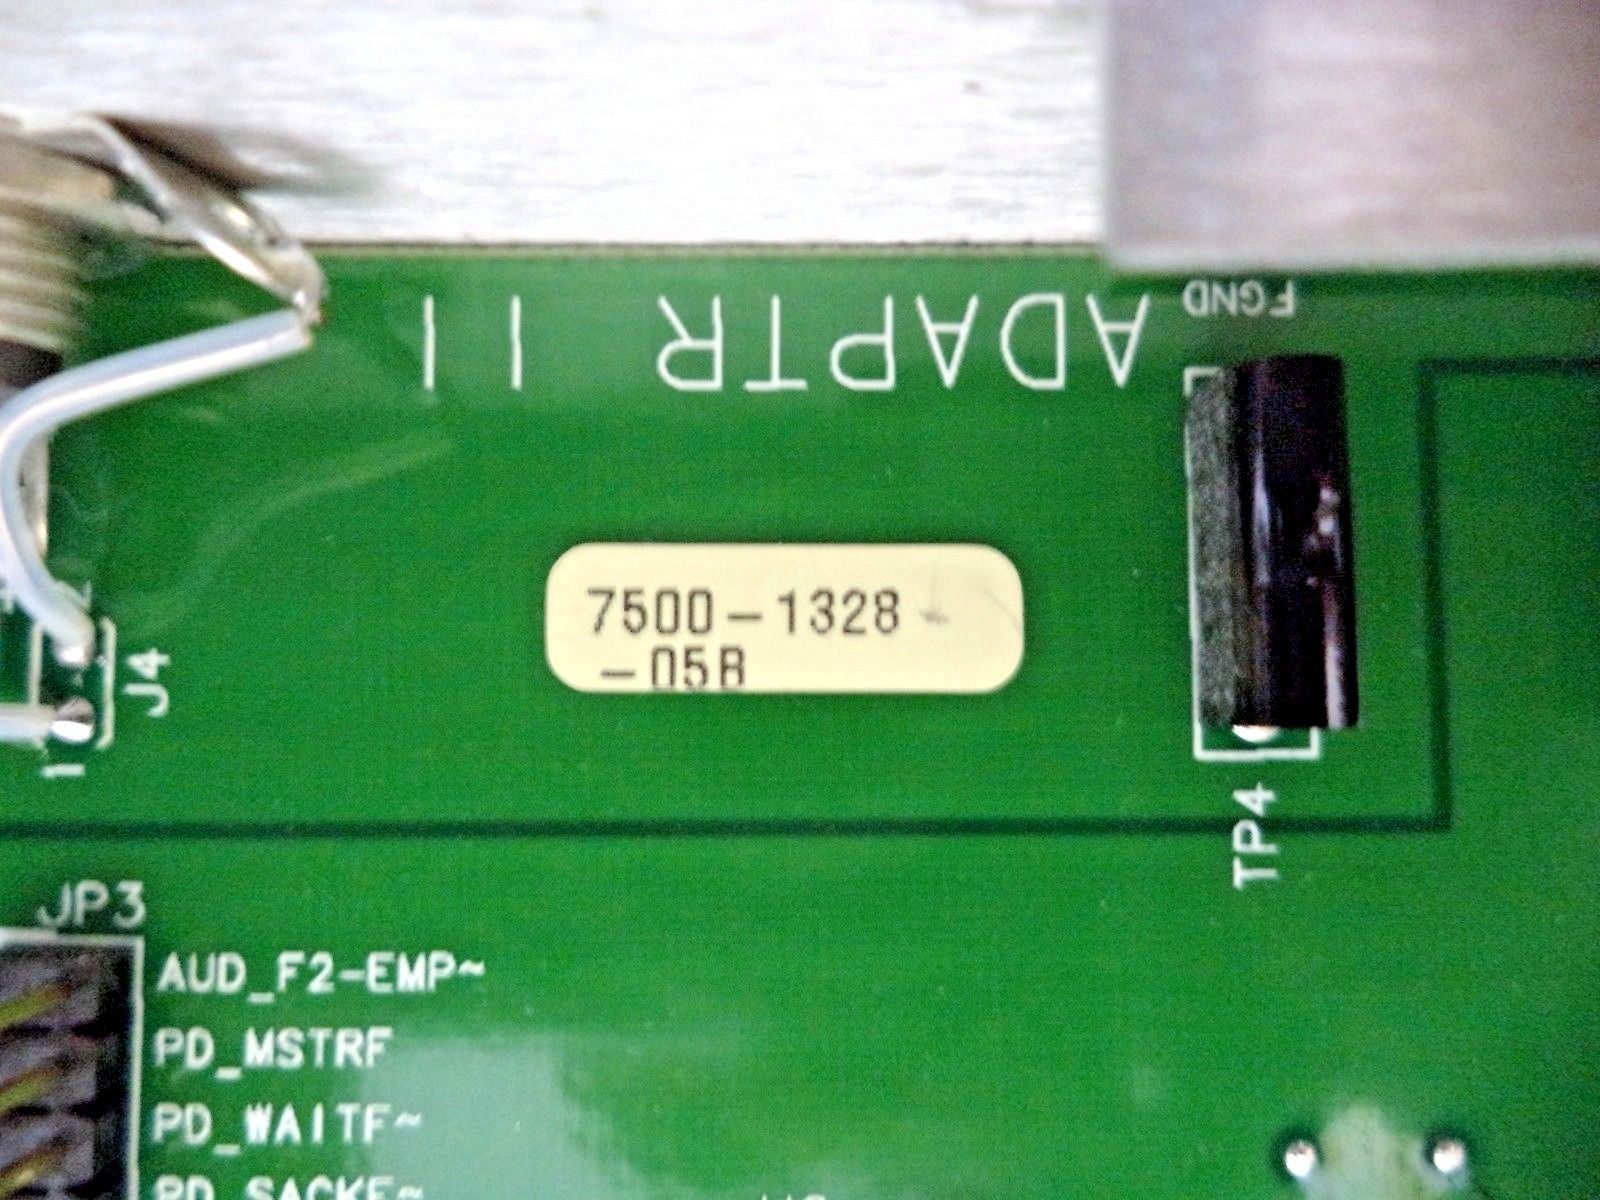 a close up of a green electronic device